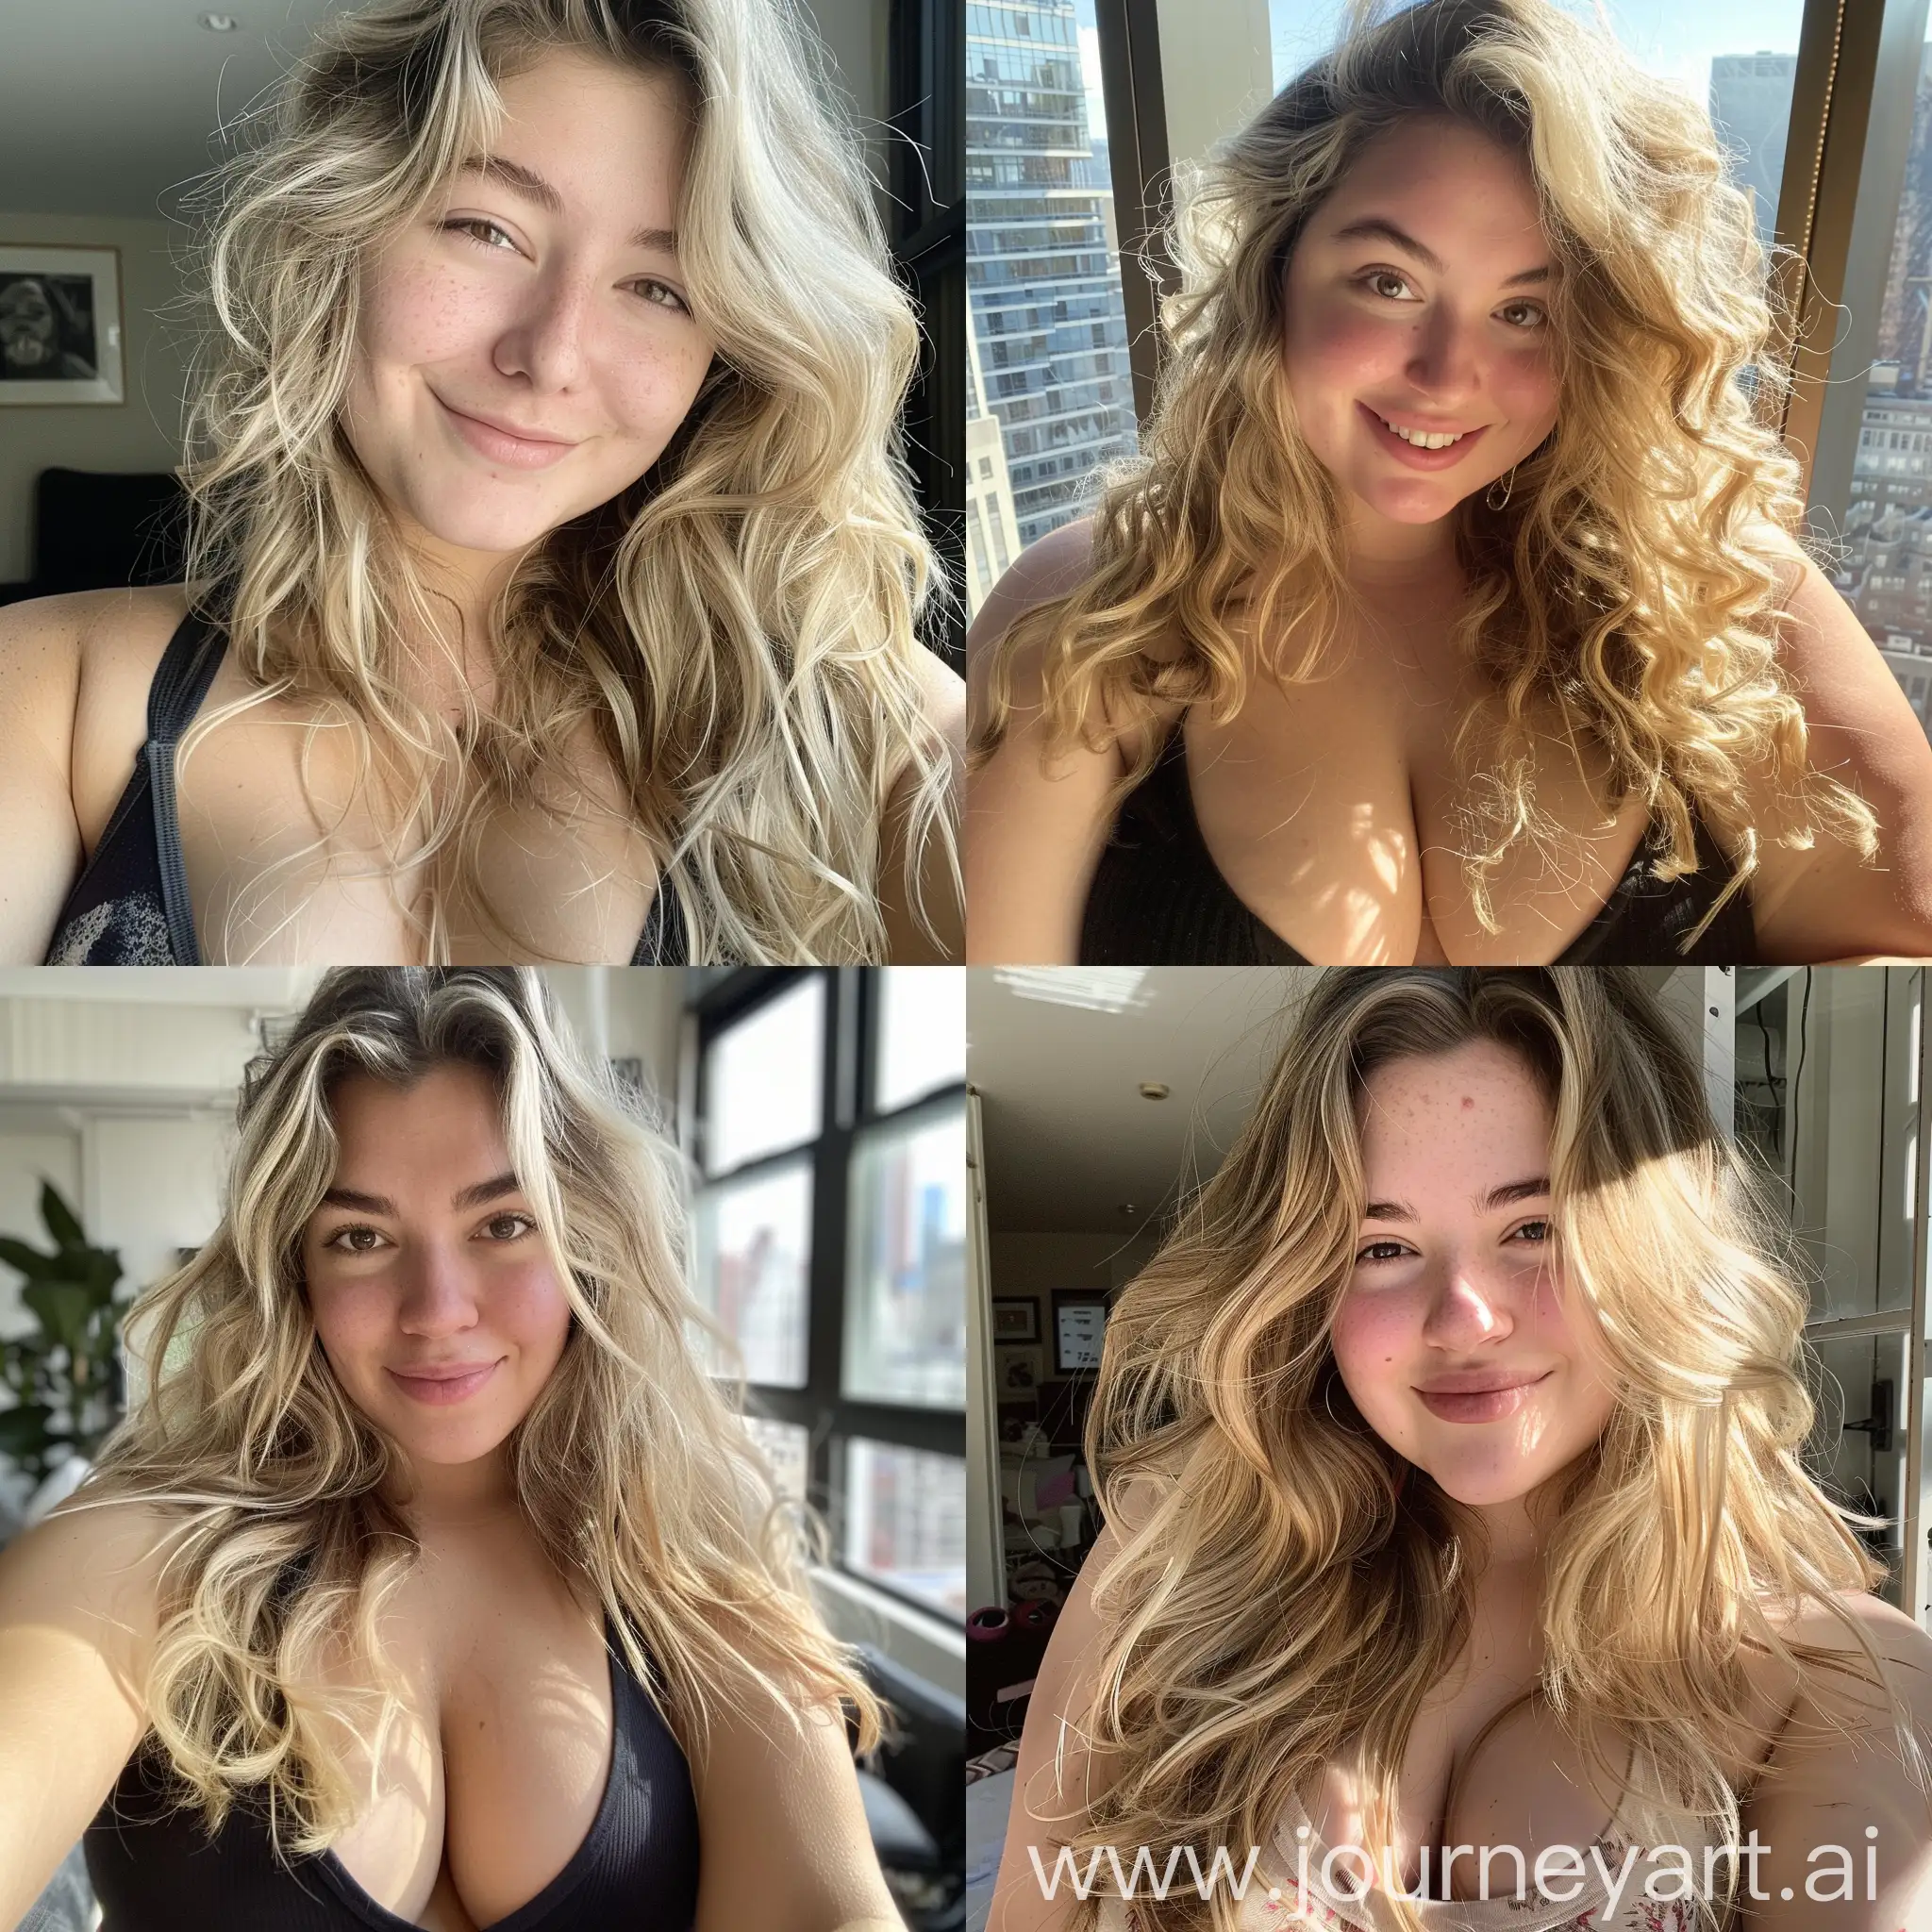 Aesthetic instagram selfie of an average chubby super model teenage girl, fancy NYC apartment, smiling, looking into camera, profile, happy, close up selfie, blonde hair, long hair, bushy eyebrows, gym clothes, nice and slightly large chest